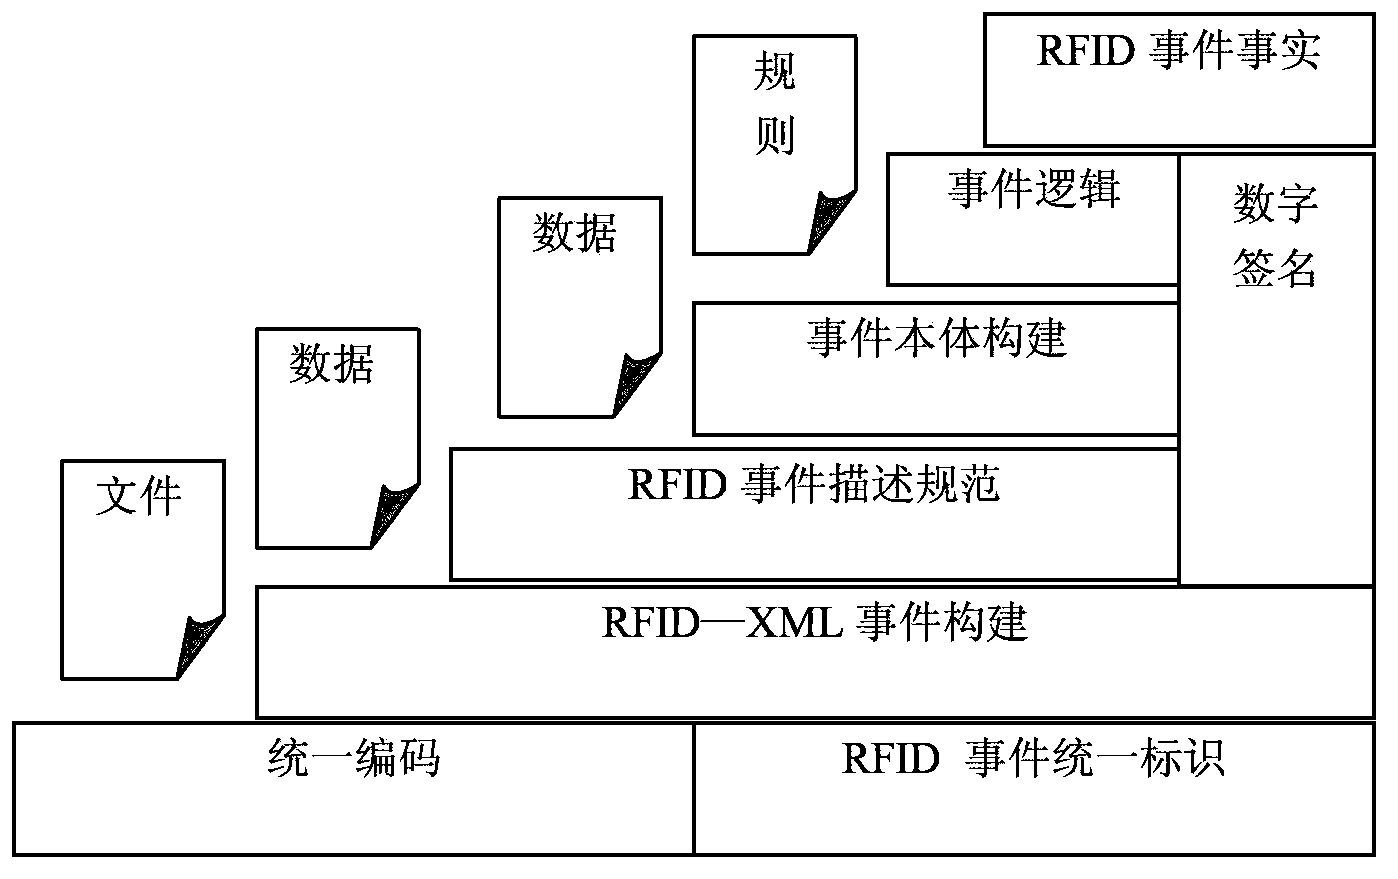 Semantic information based RFID (Radio Frequency Identification Device) complex event processing method